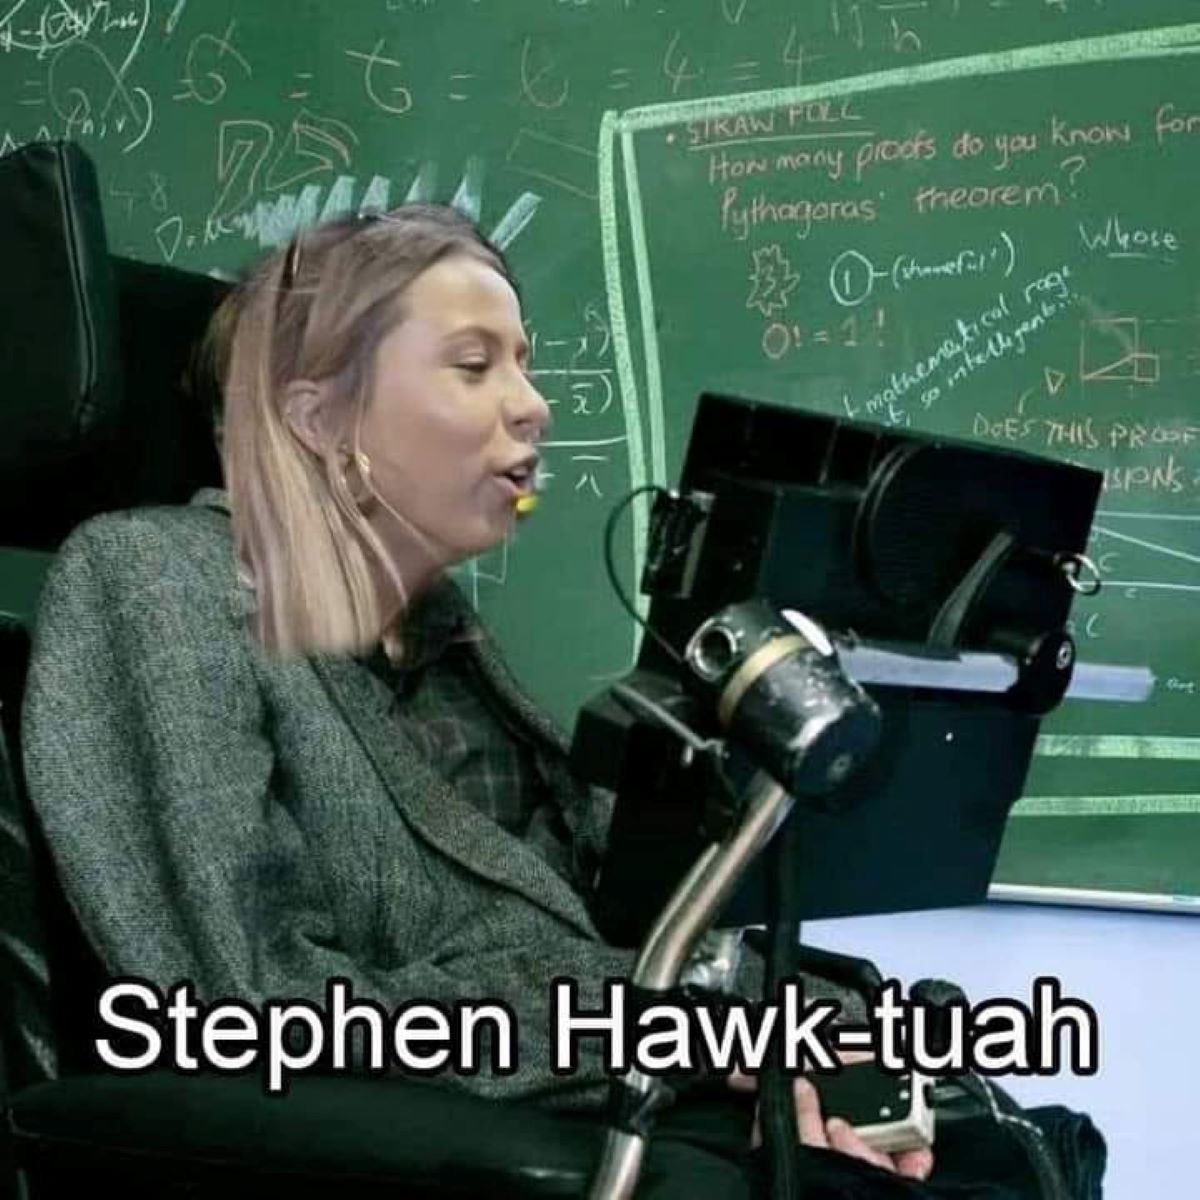 stephen william hawking - 48 664 Straw Foll How many proofs do you Pythagoras' theorem? 0111 know for Whose mathematical rage t, so intelligent... D Does This Proof Spons Stephen Hawktuah